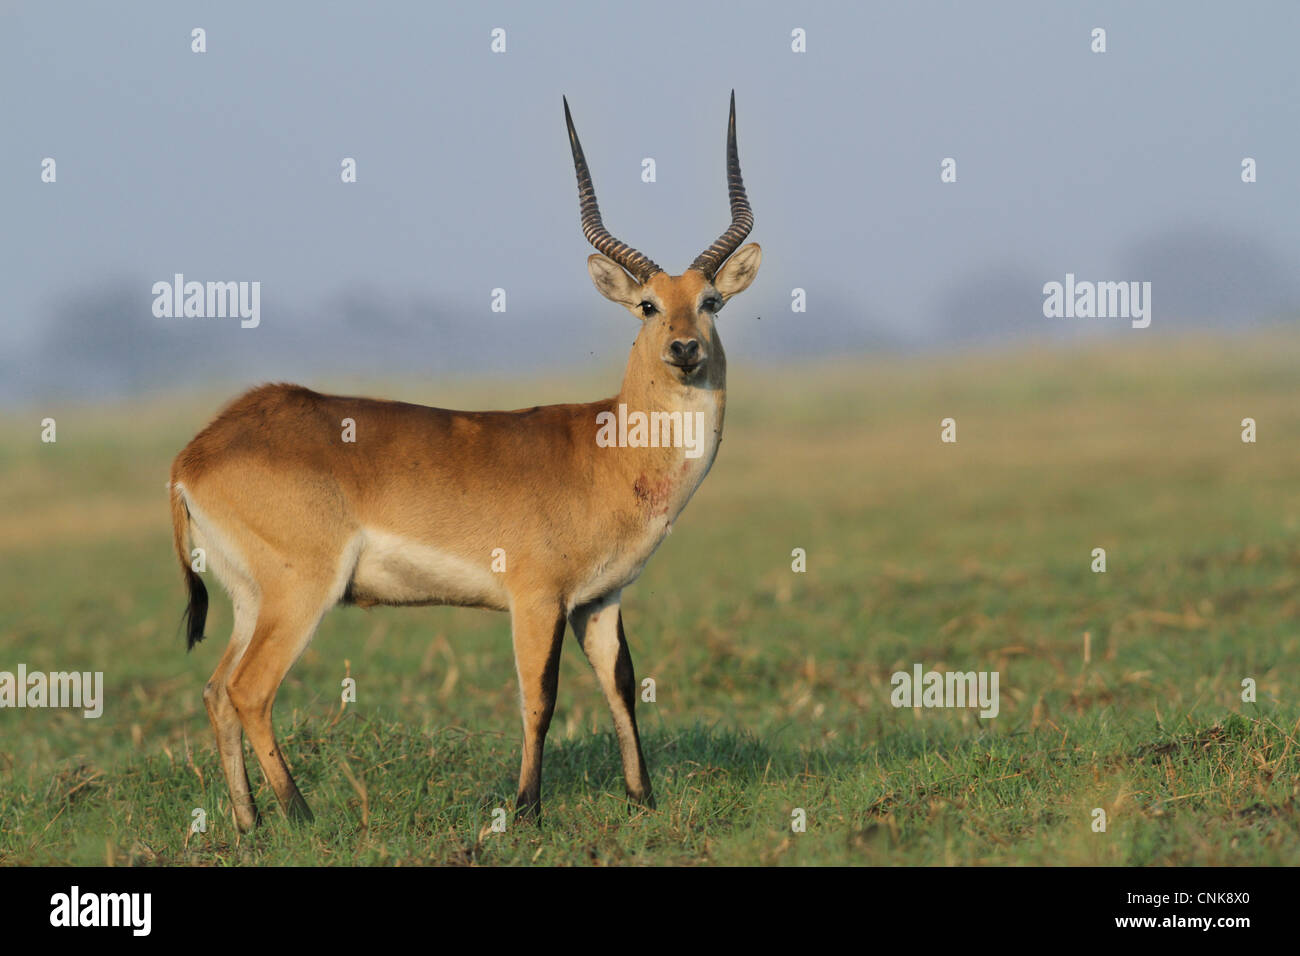 Red Lechwe (Kobus leche leche) adult male, with wound on neck, standing on grass in wetland, Chobe N.P., Botswana Stock Photo